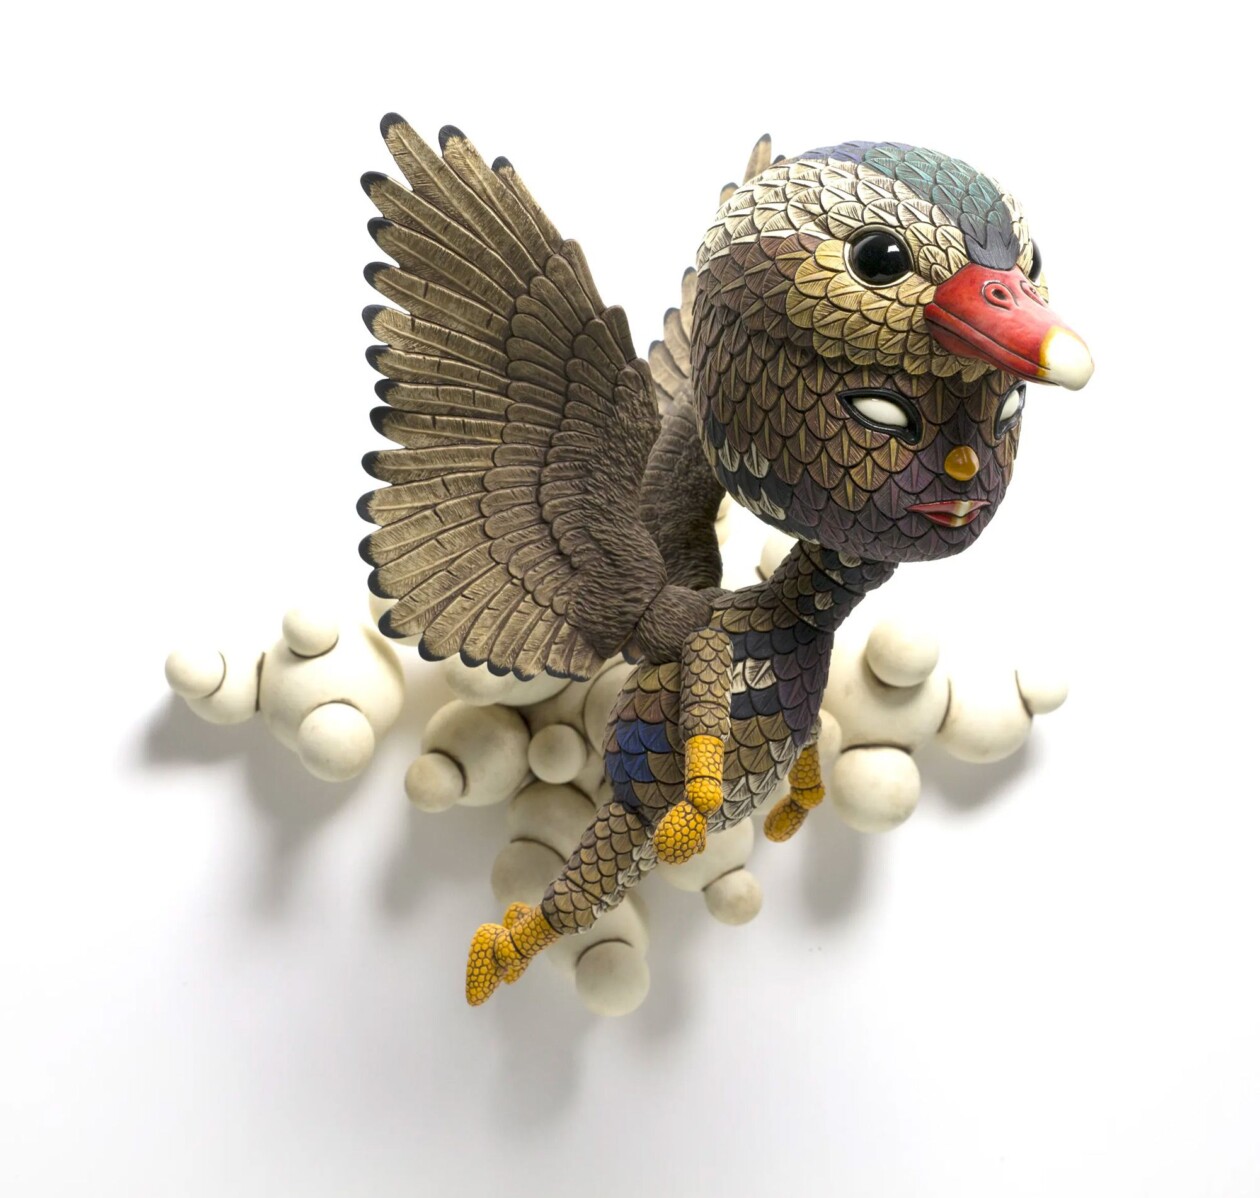 Marvelous Anthropomorphized Bird Sculptures By Calvin Ma (1)